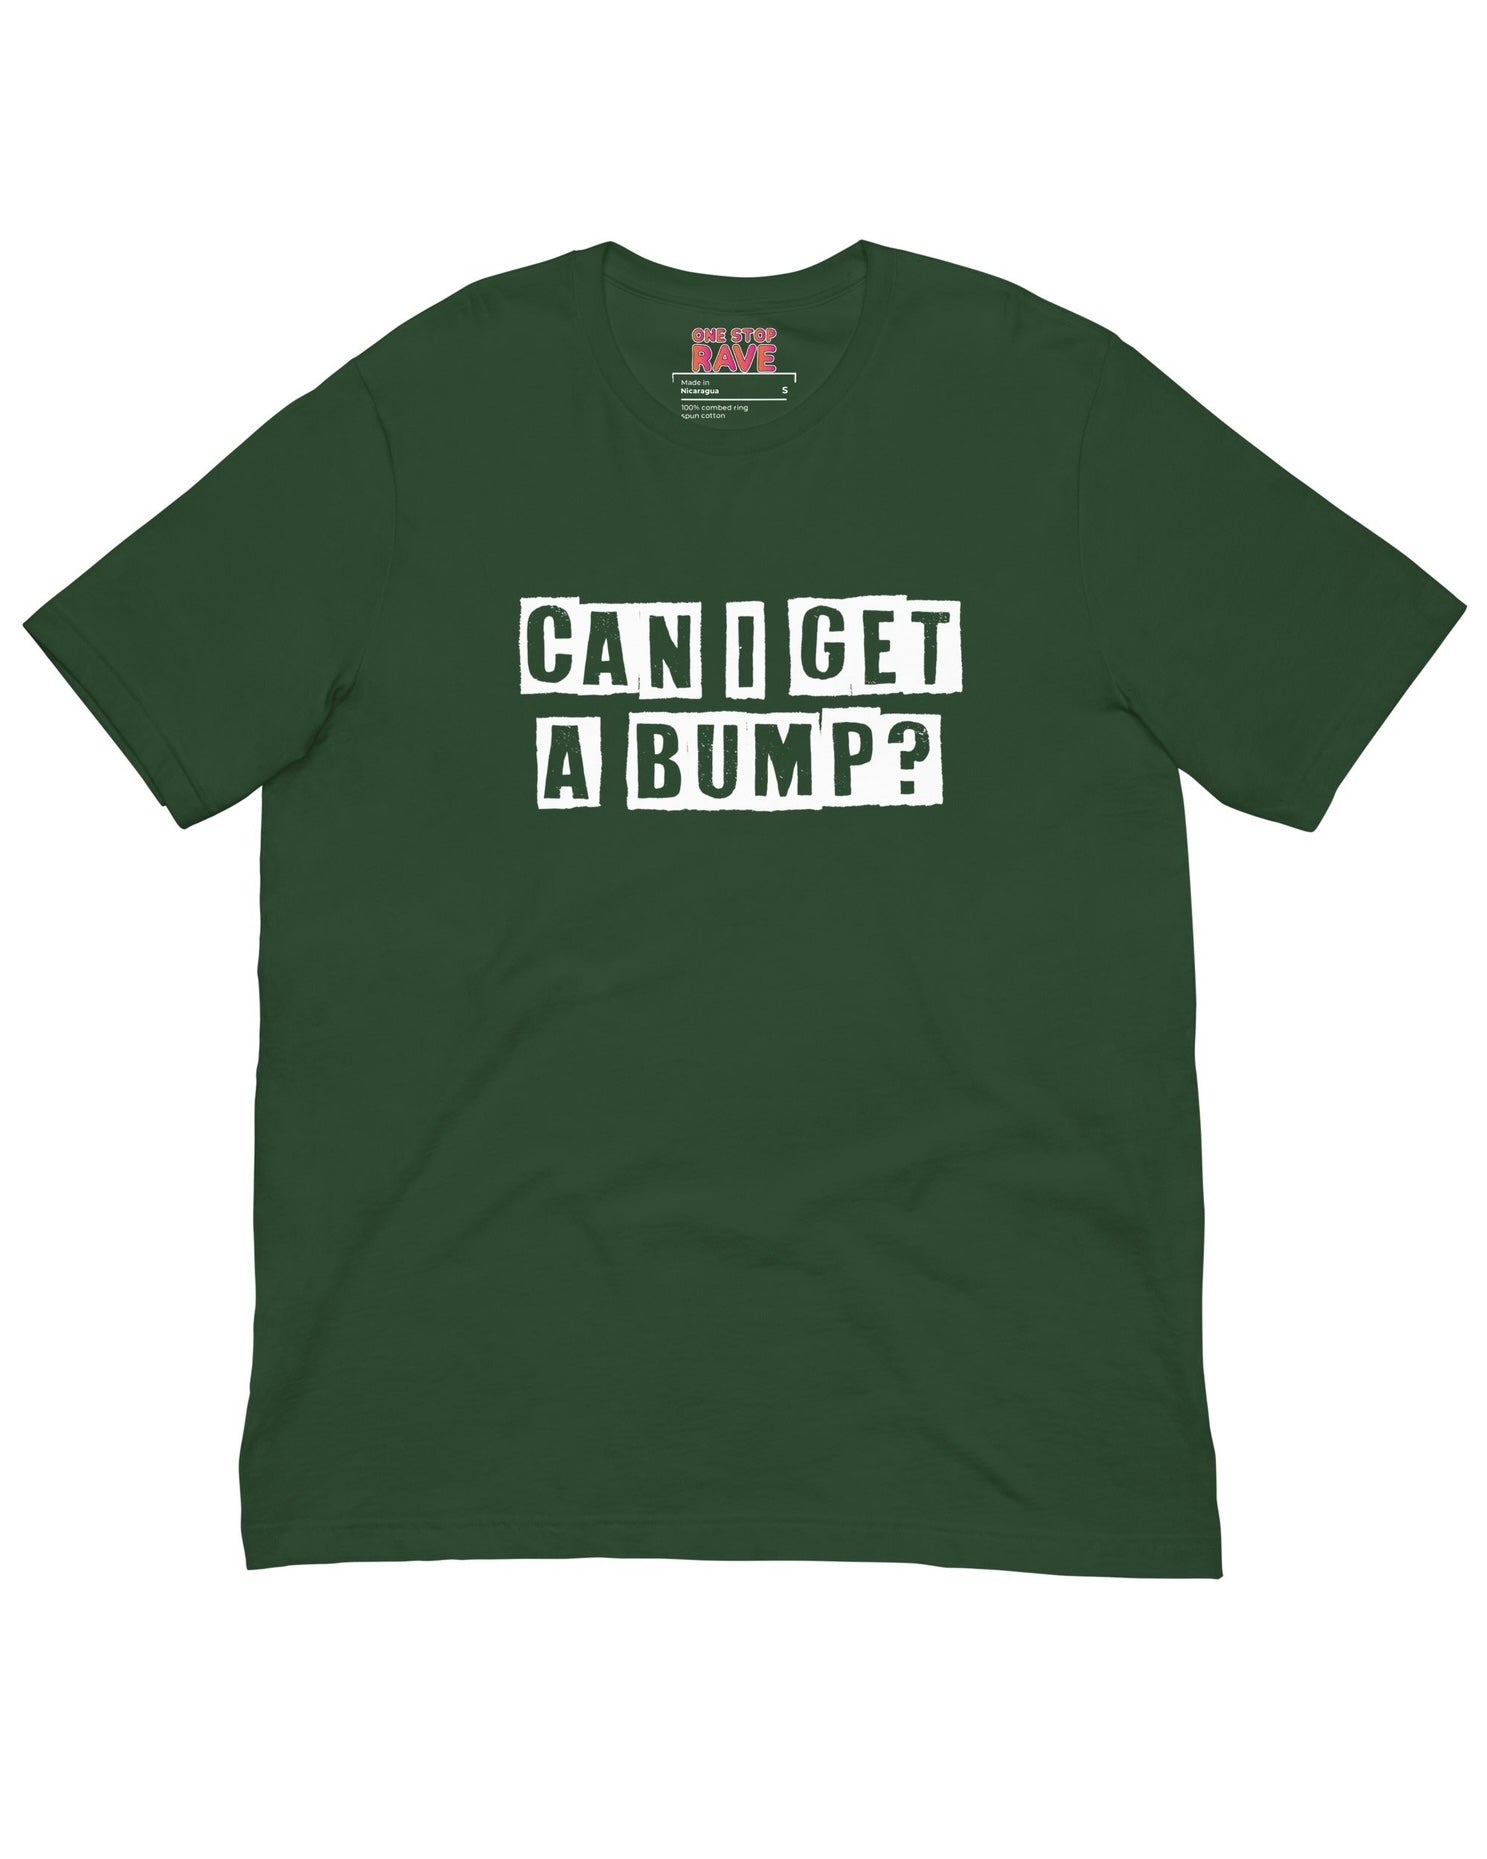 Forrest Green t-shirt with the phrase "CAN I GET A BUMP?" & OSR label